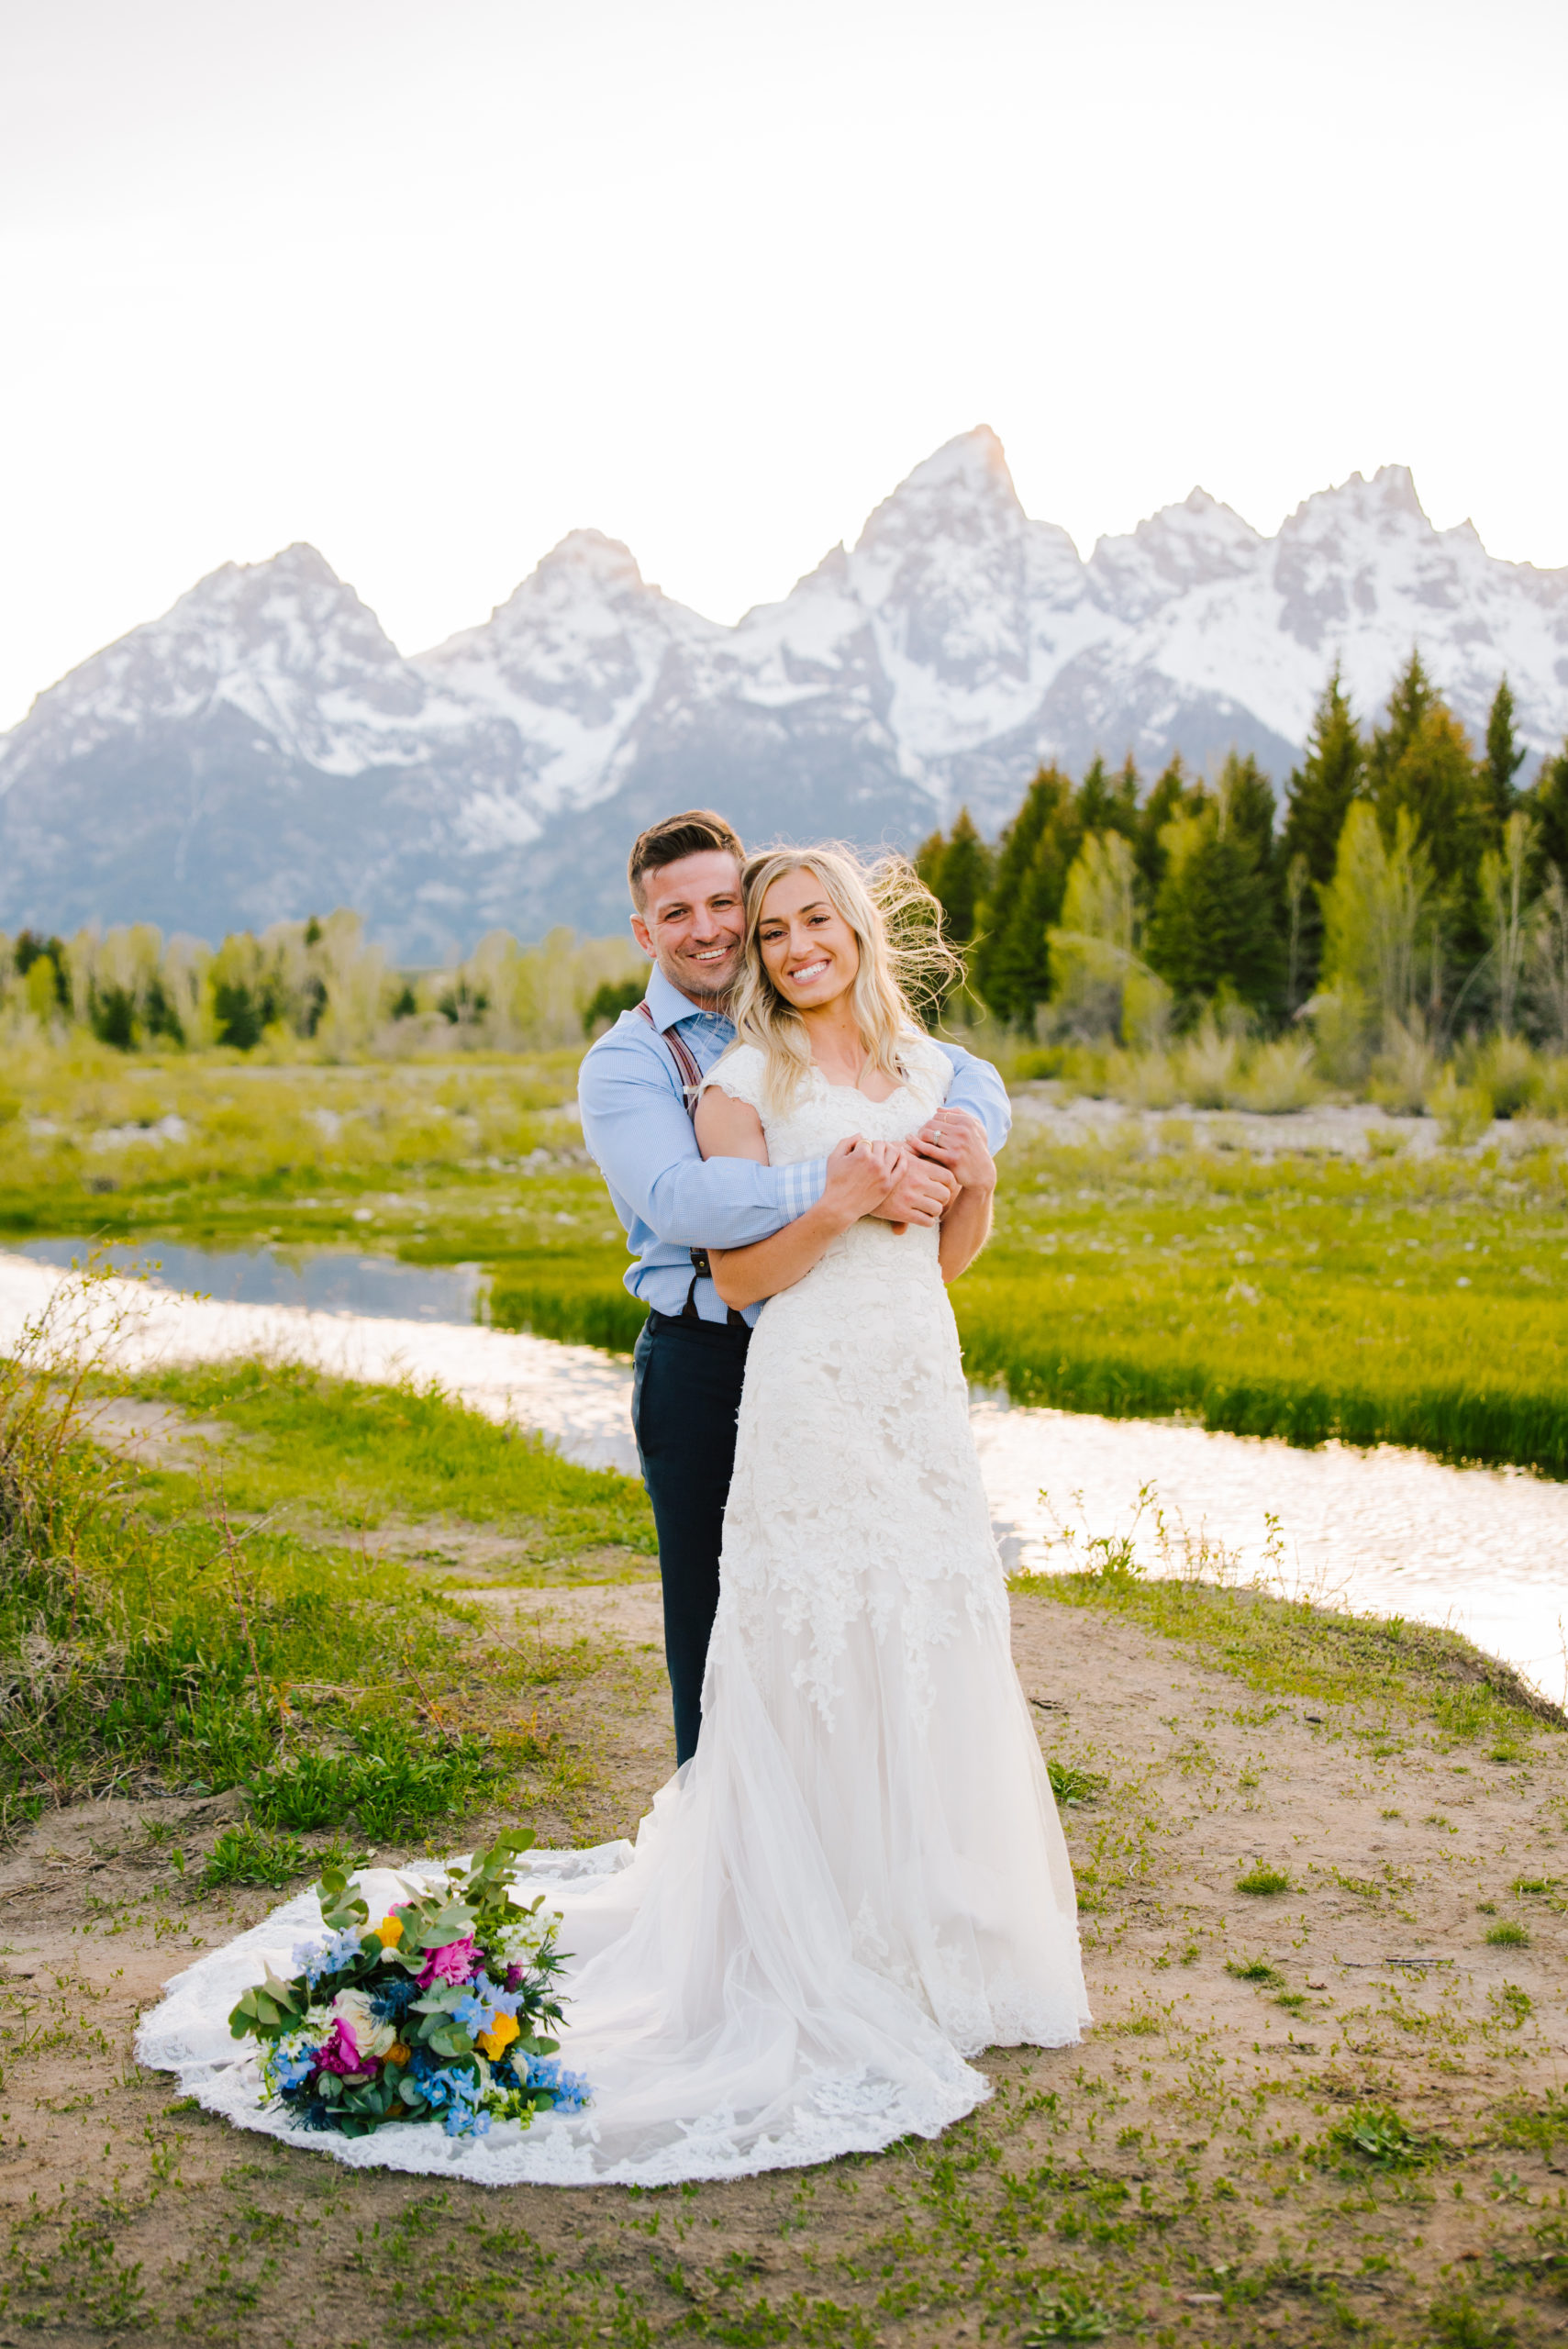 grand Tetons in the distance while bride and groom embrace each other with the brides florals on the ground next to her wedding dress captured by Jackson Hole wedding photographer